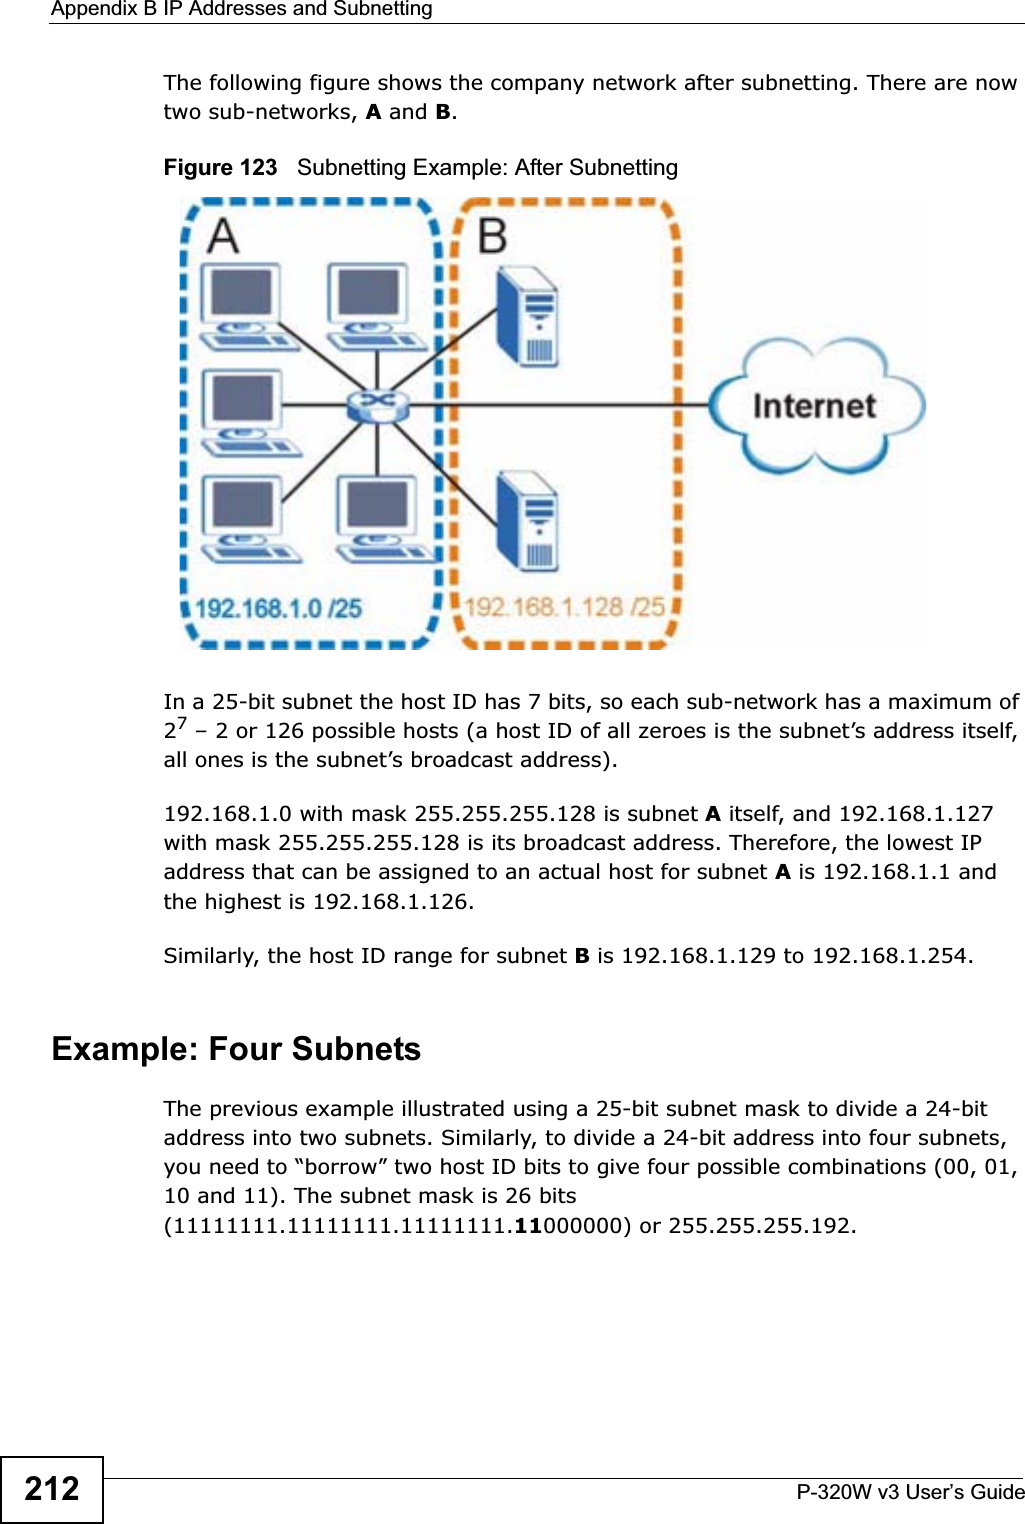 Appendix B IP Addresses and SubnettingP-320W v3 User’s Guide212The following figure shows the company network after subnetting. There are now two sub-networks, A and B.Figure 123   Subnetting Example: After SubnettingIn a 25-bit subnet the host ID has 7 bits, so each sub-network has a maximum of 27 – 2 or 126 possible hosts (a host ID of all zeroes is the subnet’s address itself, all ones is the subnet’s broadcast address).192.168.1.0 with mask 255.255.255.128 is subnet A itself, and 192.168.1.127 with mask 255.255.255.128 is its broadcast address. Therefore, the lowest IP address that can be assigned to an actual host for subnet A is 192.168.1.1 and the highest is 192.168.1.126. Similarly, the host ID range for subnet B is 192.168.1.129 to 192.168.1.254.Example: Four Subnets The previous example illustrated using a 25-bit subnet mask to divide a 24-bit address into two subnets. Similarly, to divide a 24-bit address into four subnets, you need to “borrow” two host ID bits to give four possible combinations (00, 01, 10 and 11). The subnet mask is 26 bits (11111111.11111111.11111111.11000000) or 255.255.255.192. 